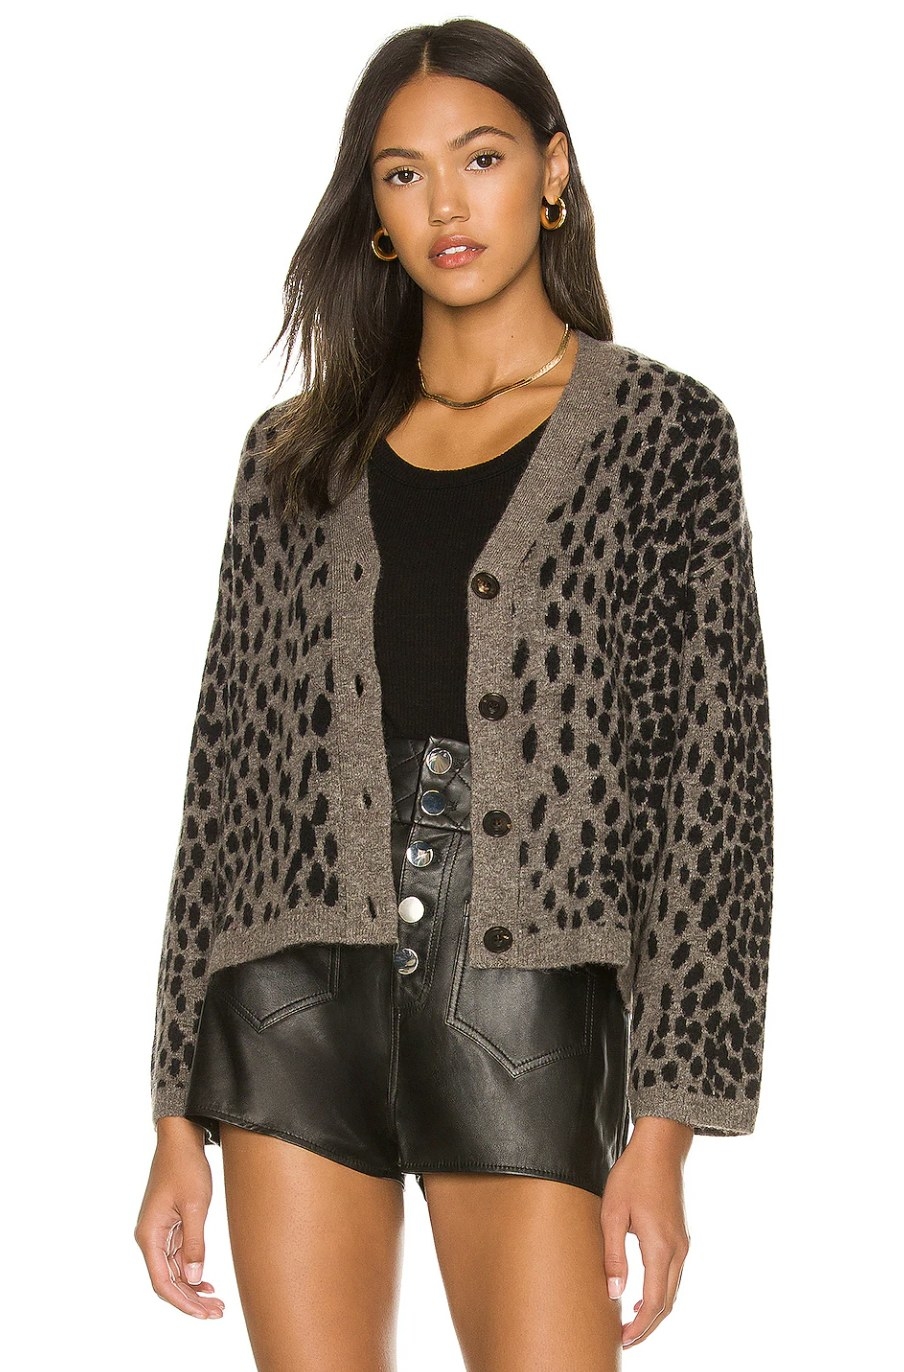 Model wearing the brown and black spotted cardigan over black tee with black leather shorts